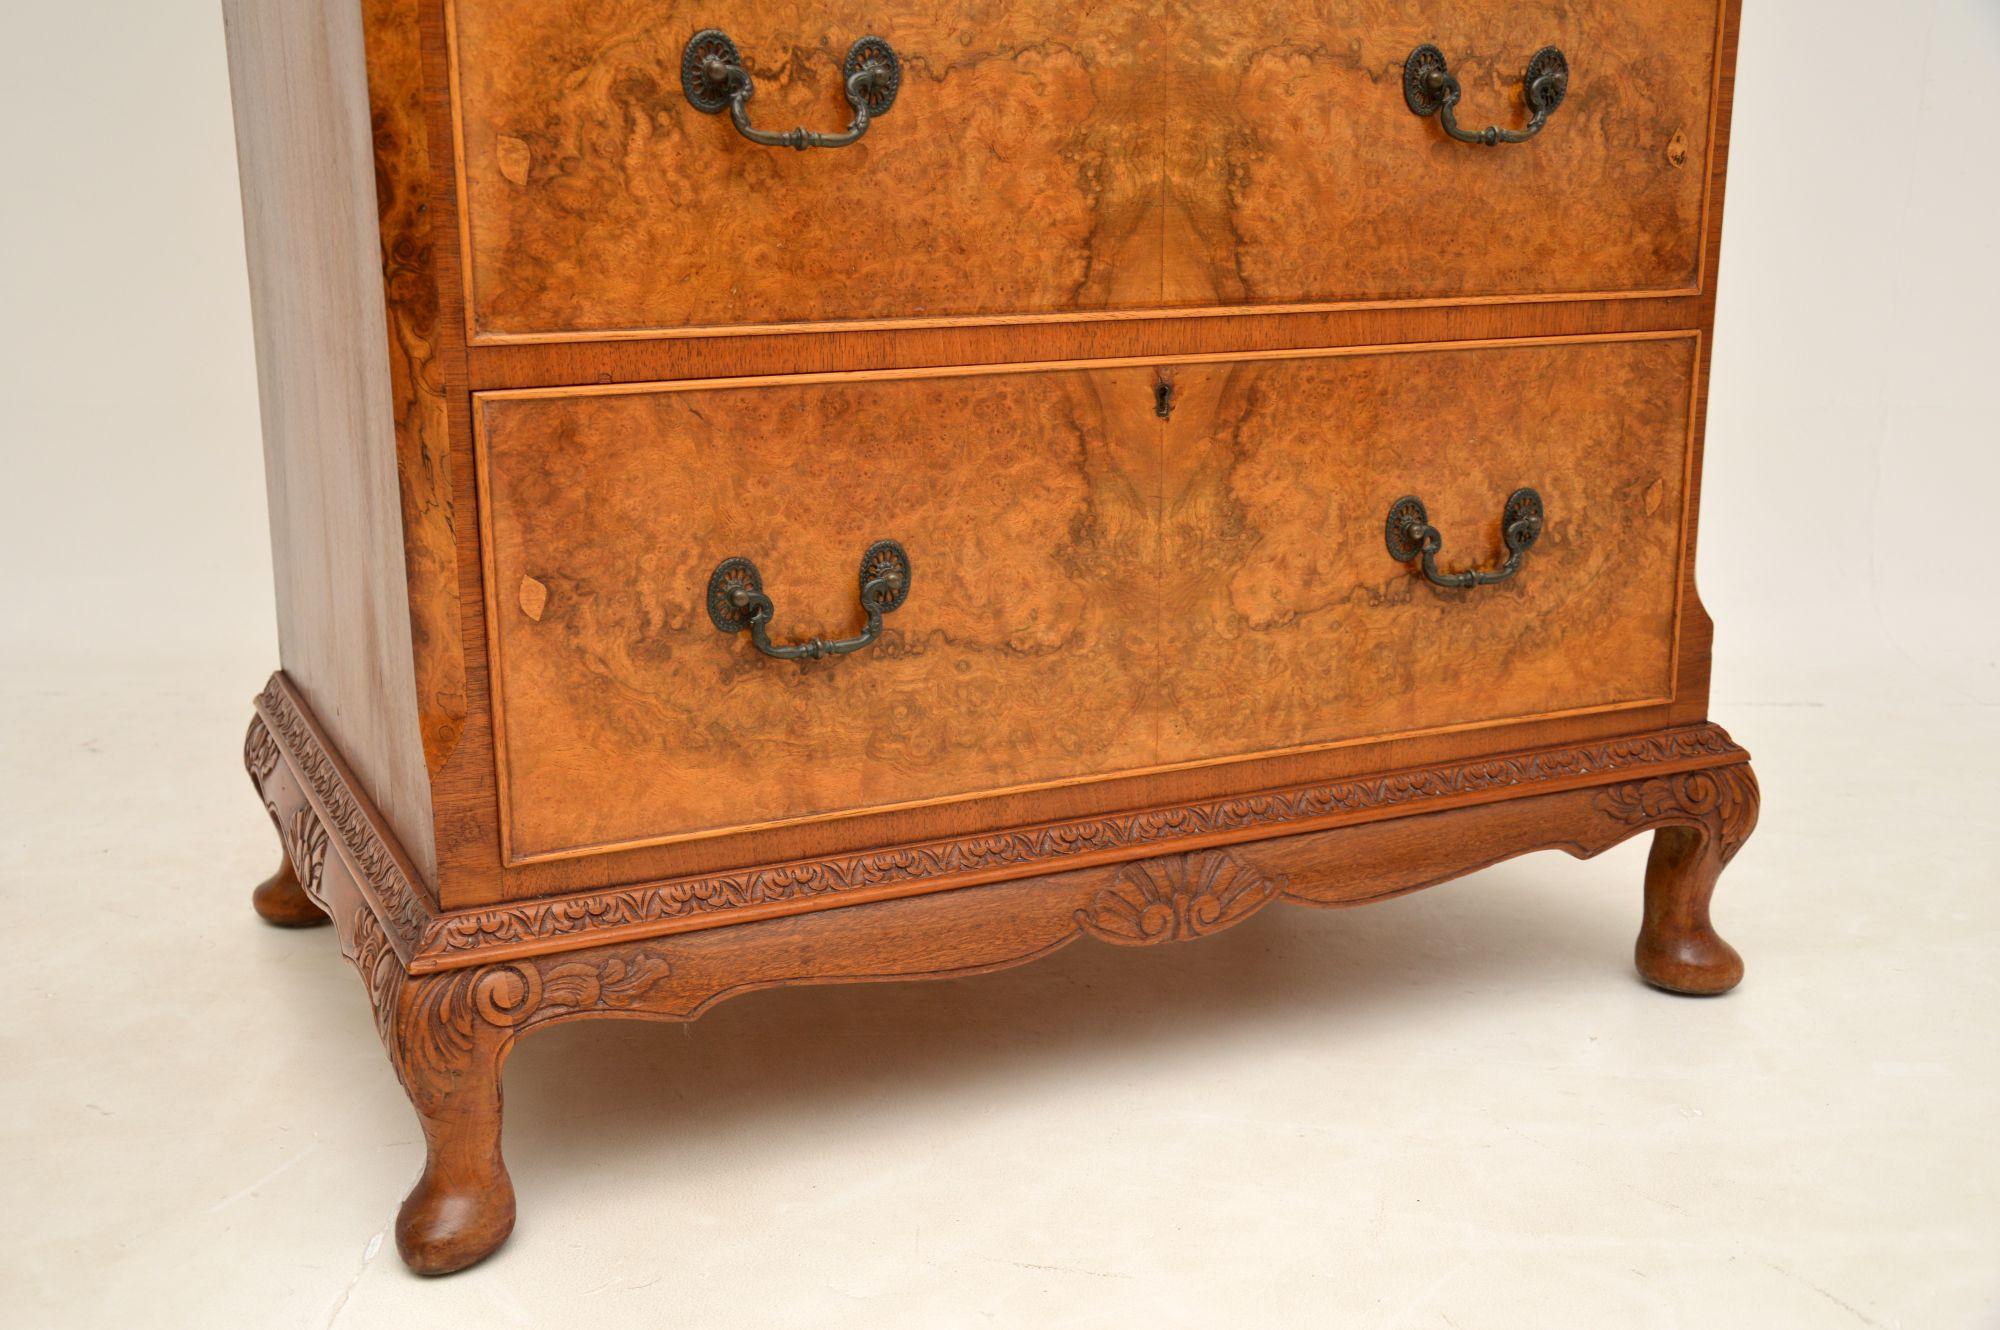 20th Century Antique Burr Walnut Cabinet on Chest of Drawers